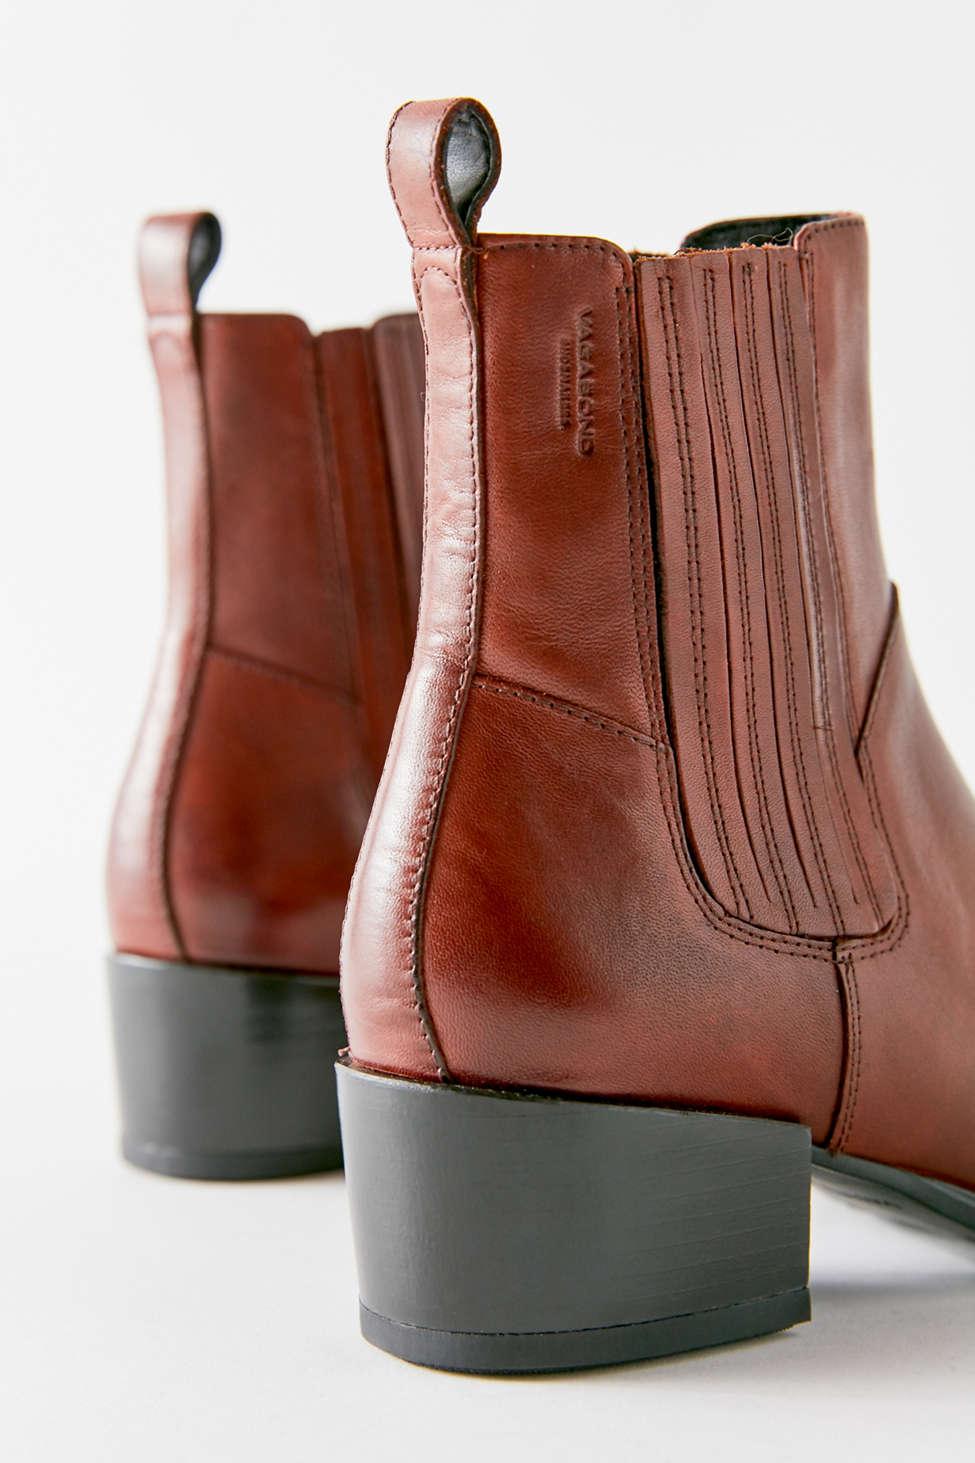 Vagabond Leather Marja Chelsea Boot in Light Brown (Brown) - Lyst